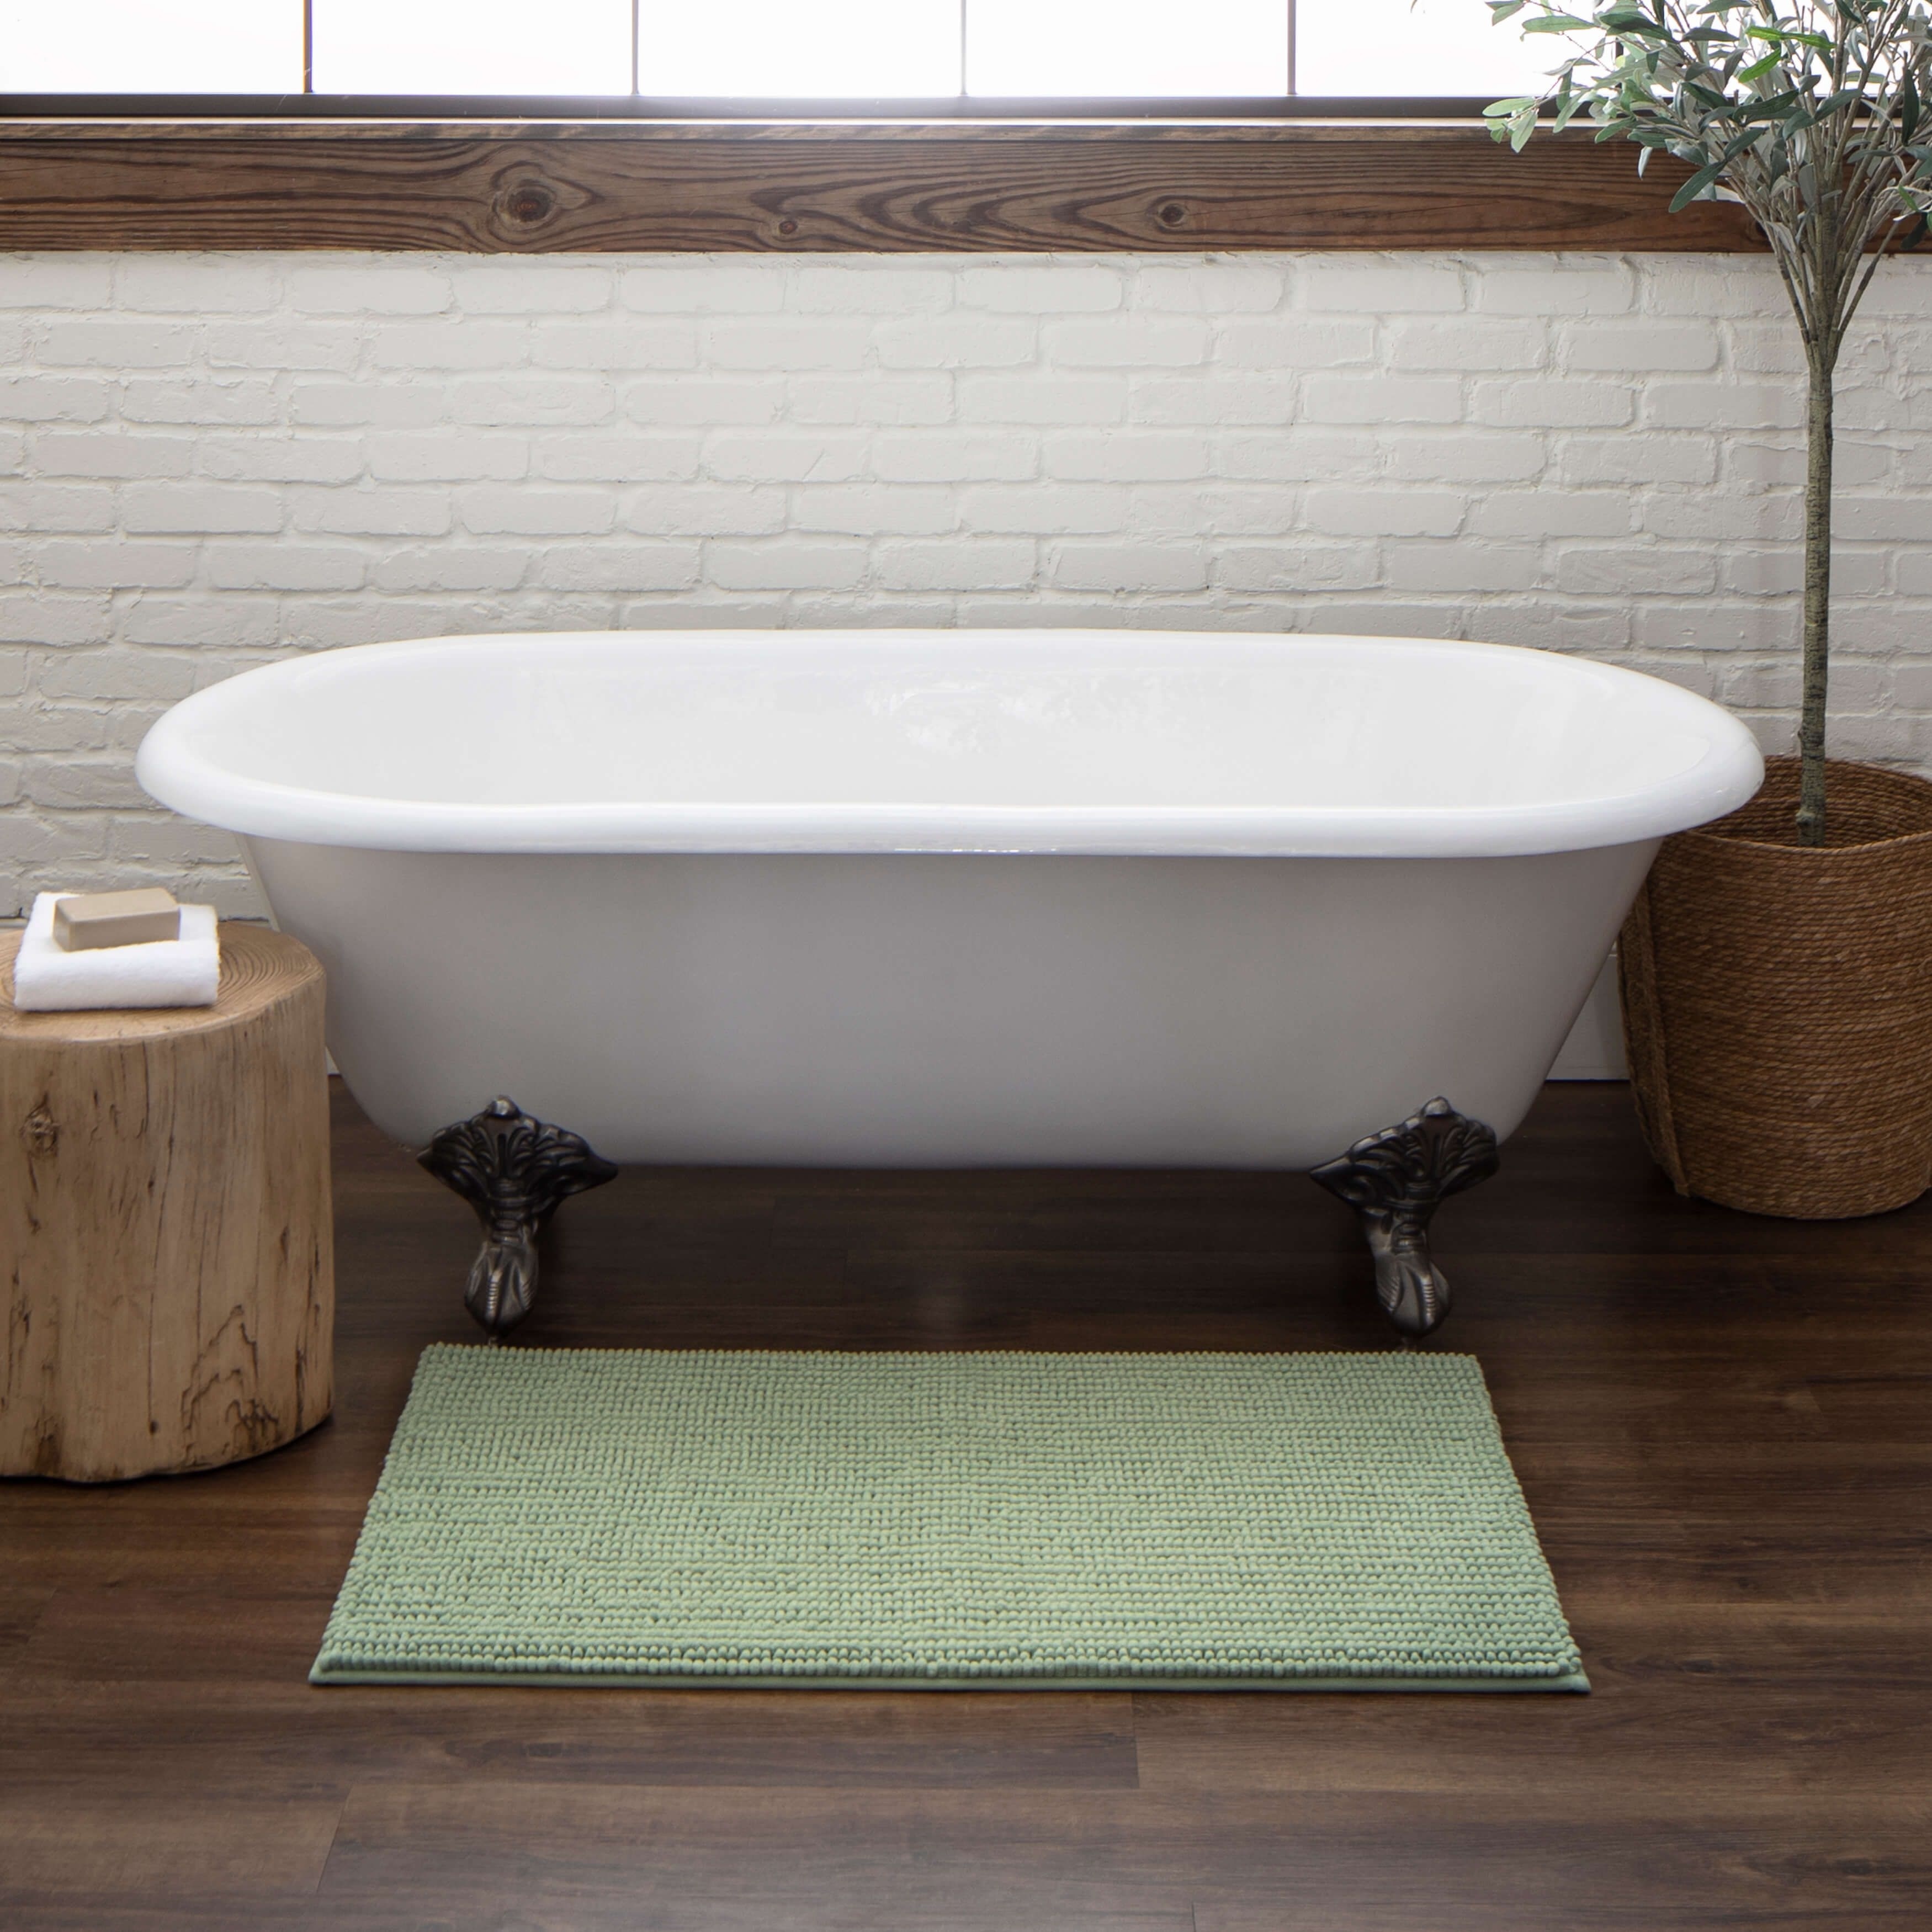 https://ak1.ostkcdn.com/images/products/is/images/direct/2ad263b6089d1ac3c954089c9df5e28ed487c02c/Mohawk-Home-Homespun-Noodle-Bath-Rug.jpg